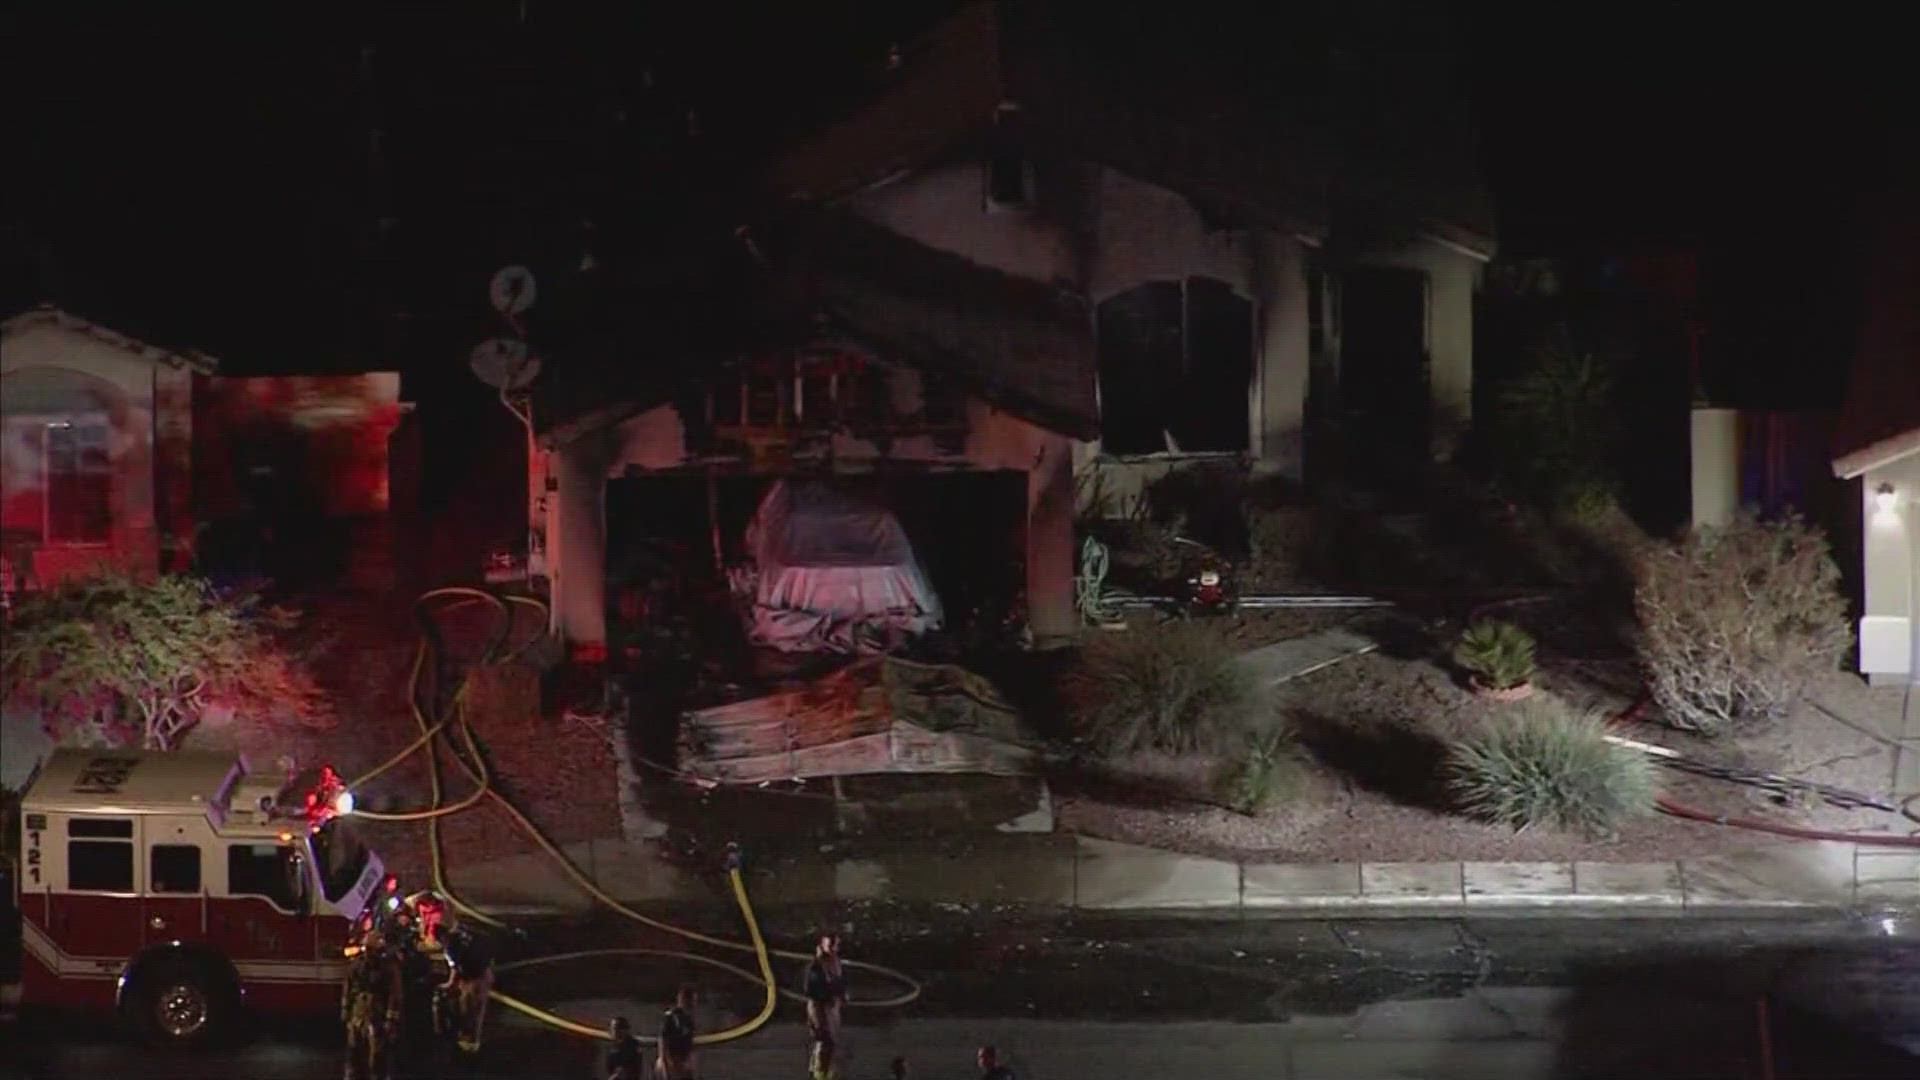 A home in Surprise appears to have been destroyed after a significant fire Tuesday evening.